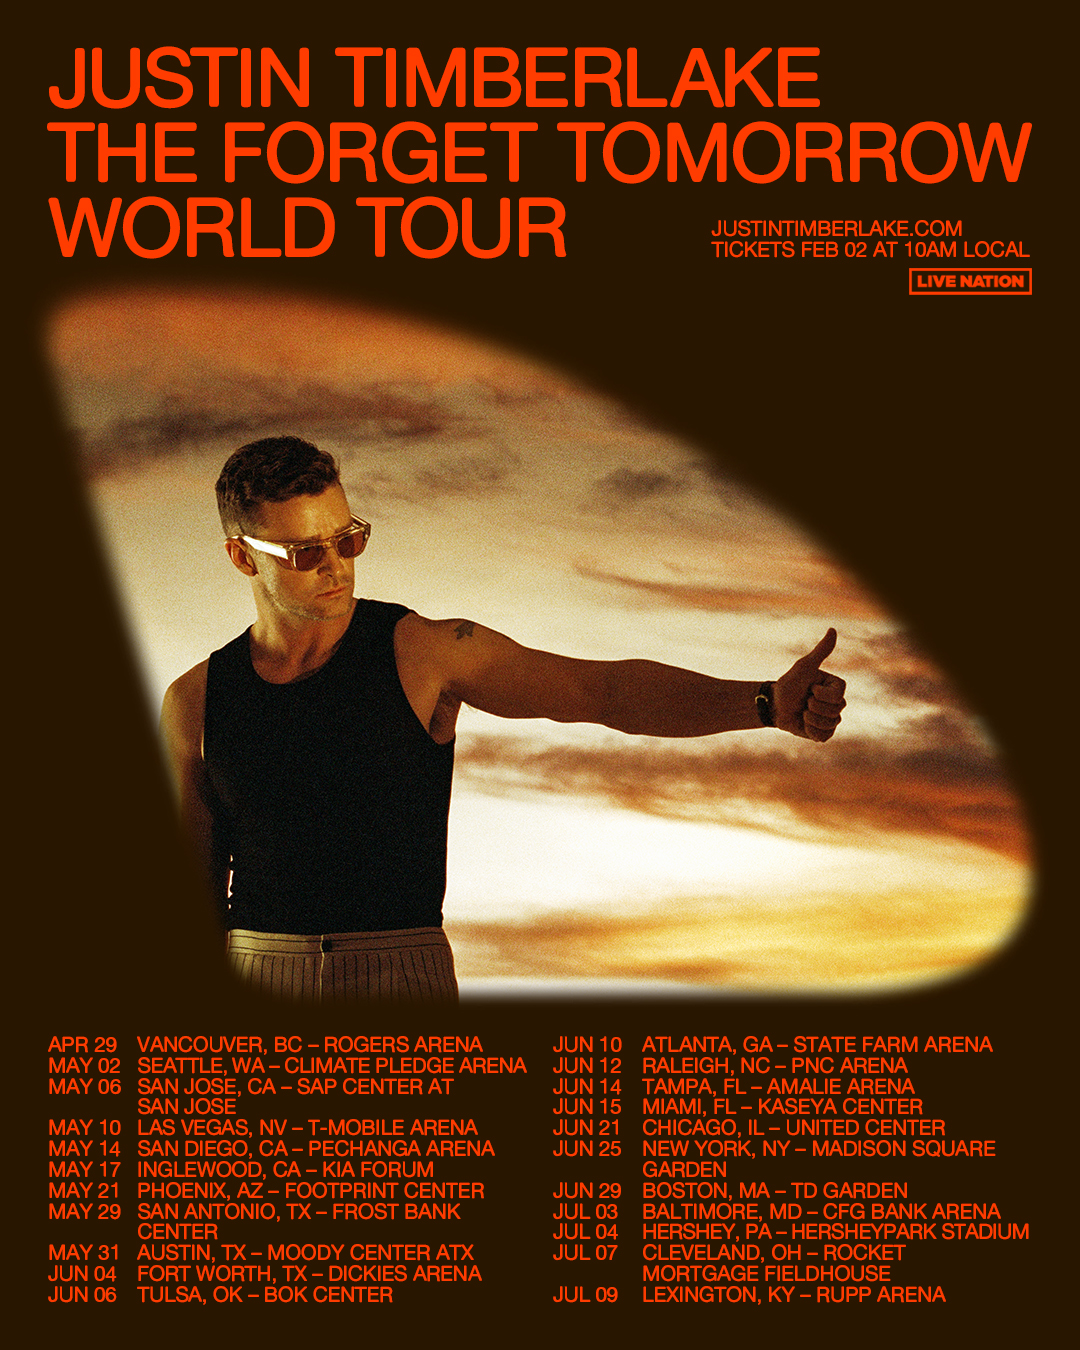 Justin Timberlake - The Forget Tomorrow World Tour in der Moody Center ATX Tickets